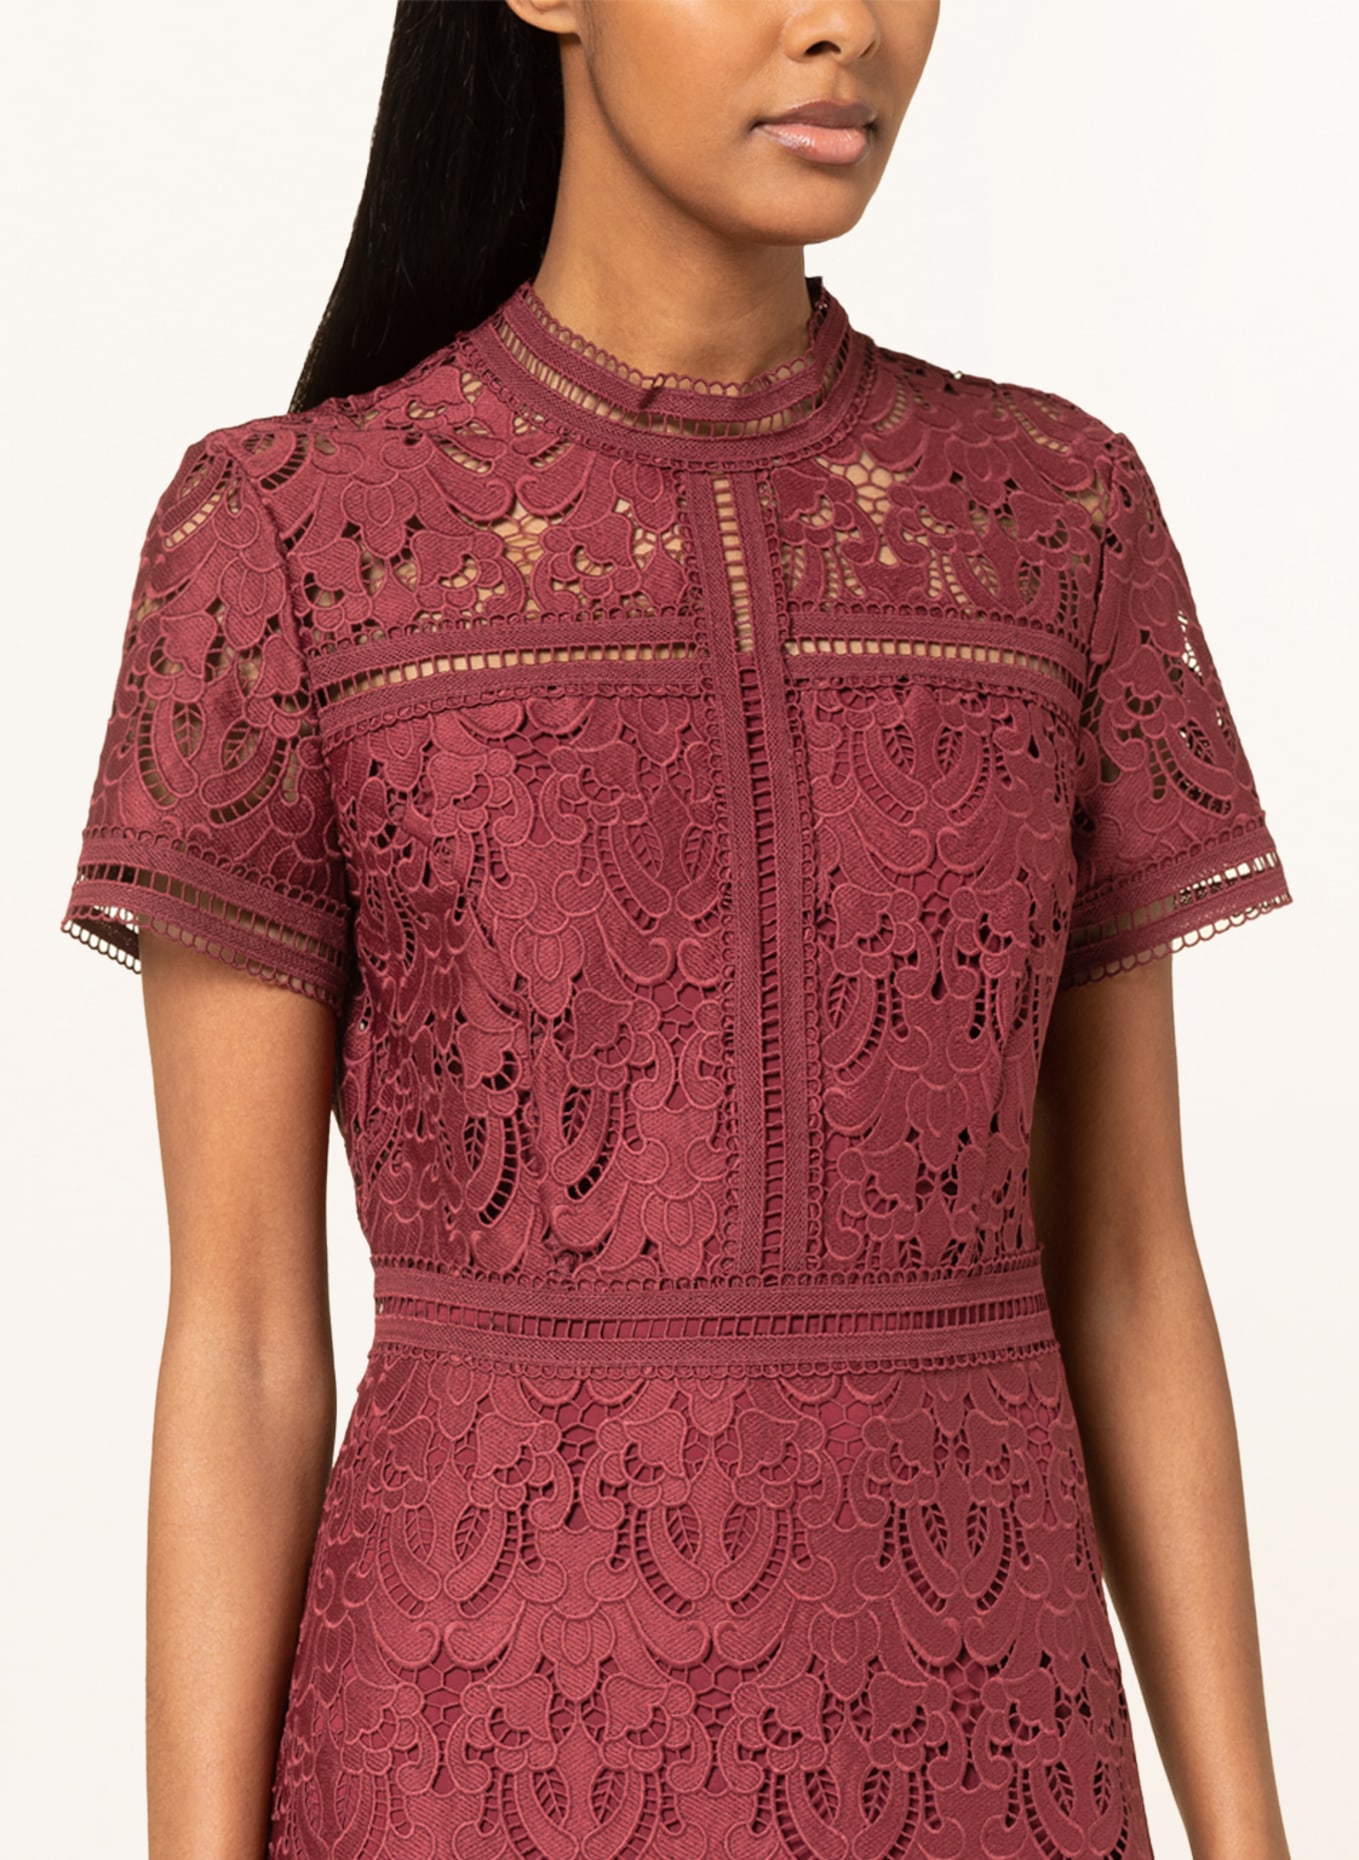 IVY OAK Lace dress MARIANNA with cut-out, Color: DARK RED (Image 4)